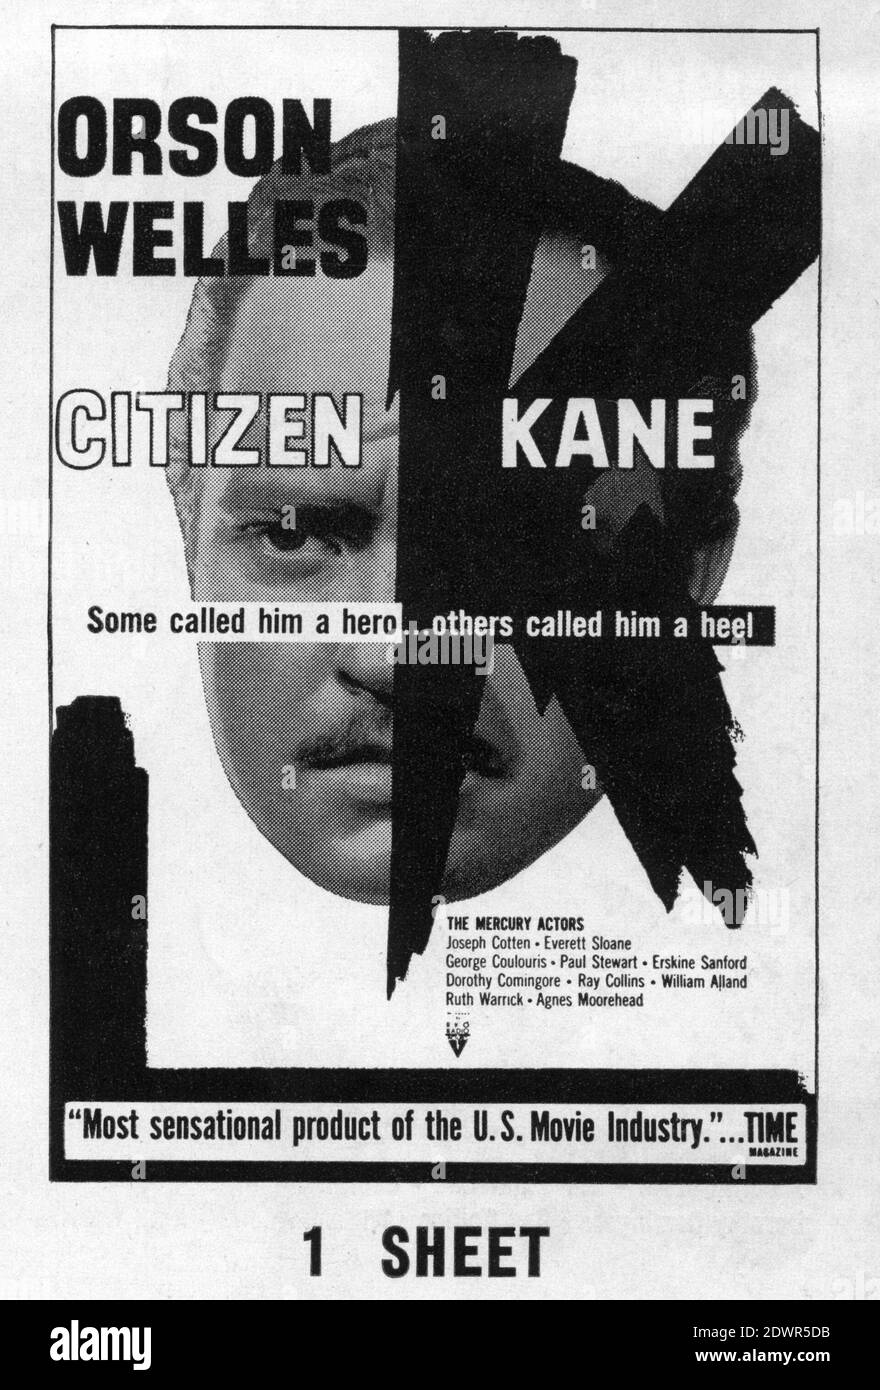 ORSON WELLES as Charles Foster Kane in CITIZEN KANE 1941 / 1956 director ORSON WELLES screenplay Herman J. Mankiewicz and Orson Welles music Bernard Herrmann Mercury Productions / RKO Radio Pictures Stock Photo